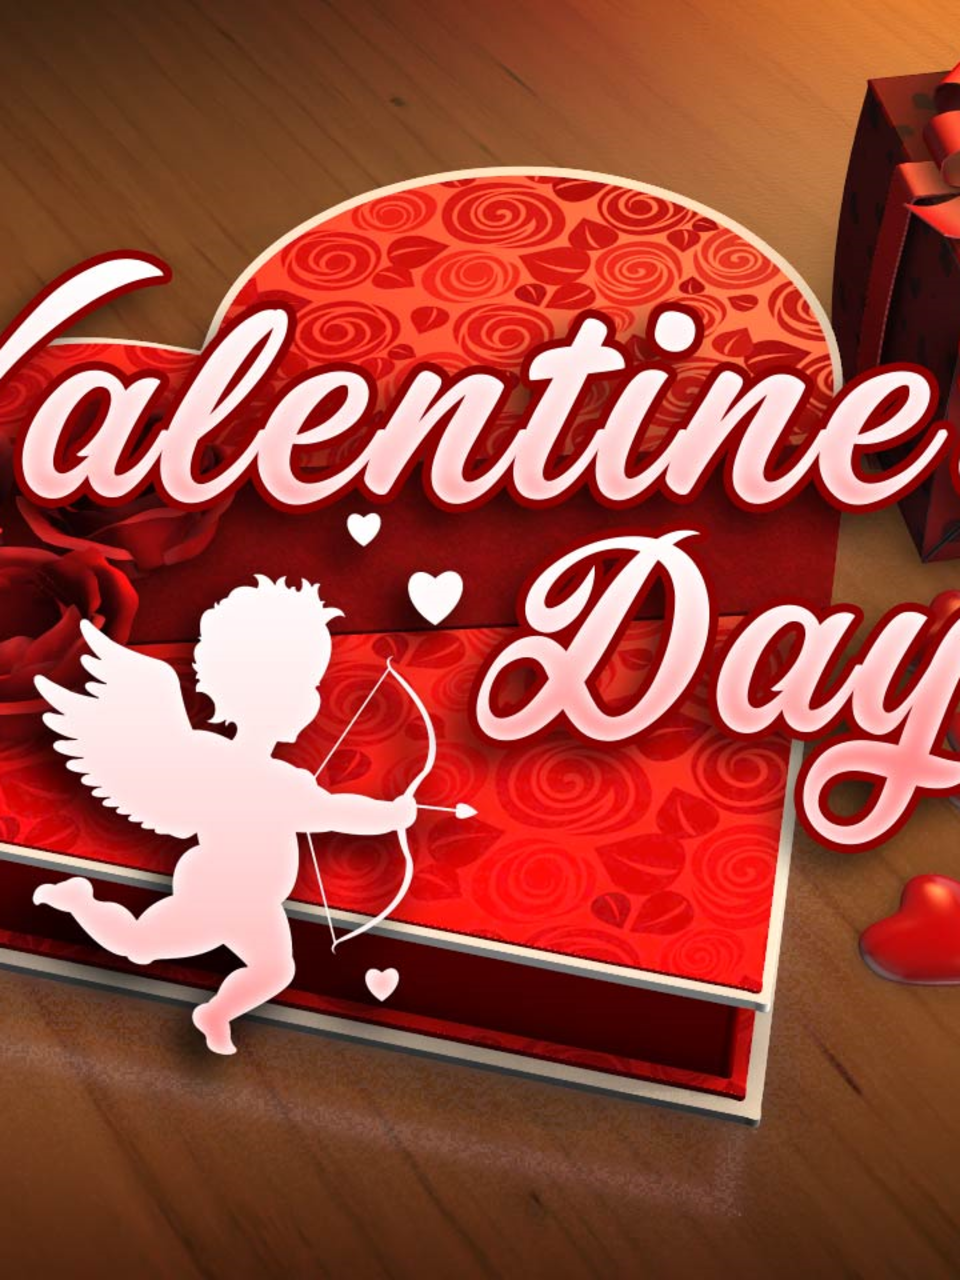 2020 Valentine S Day Deals And Events In Central Ohio Wsyx